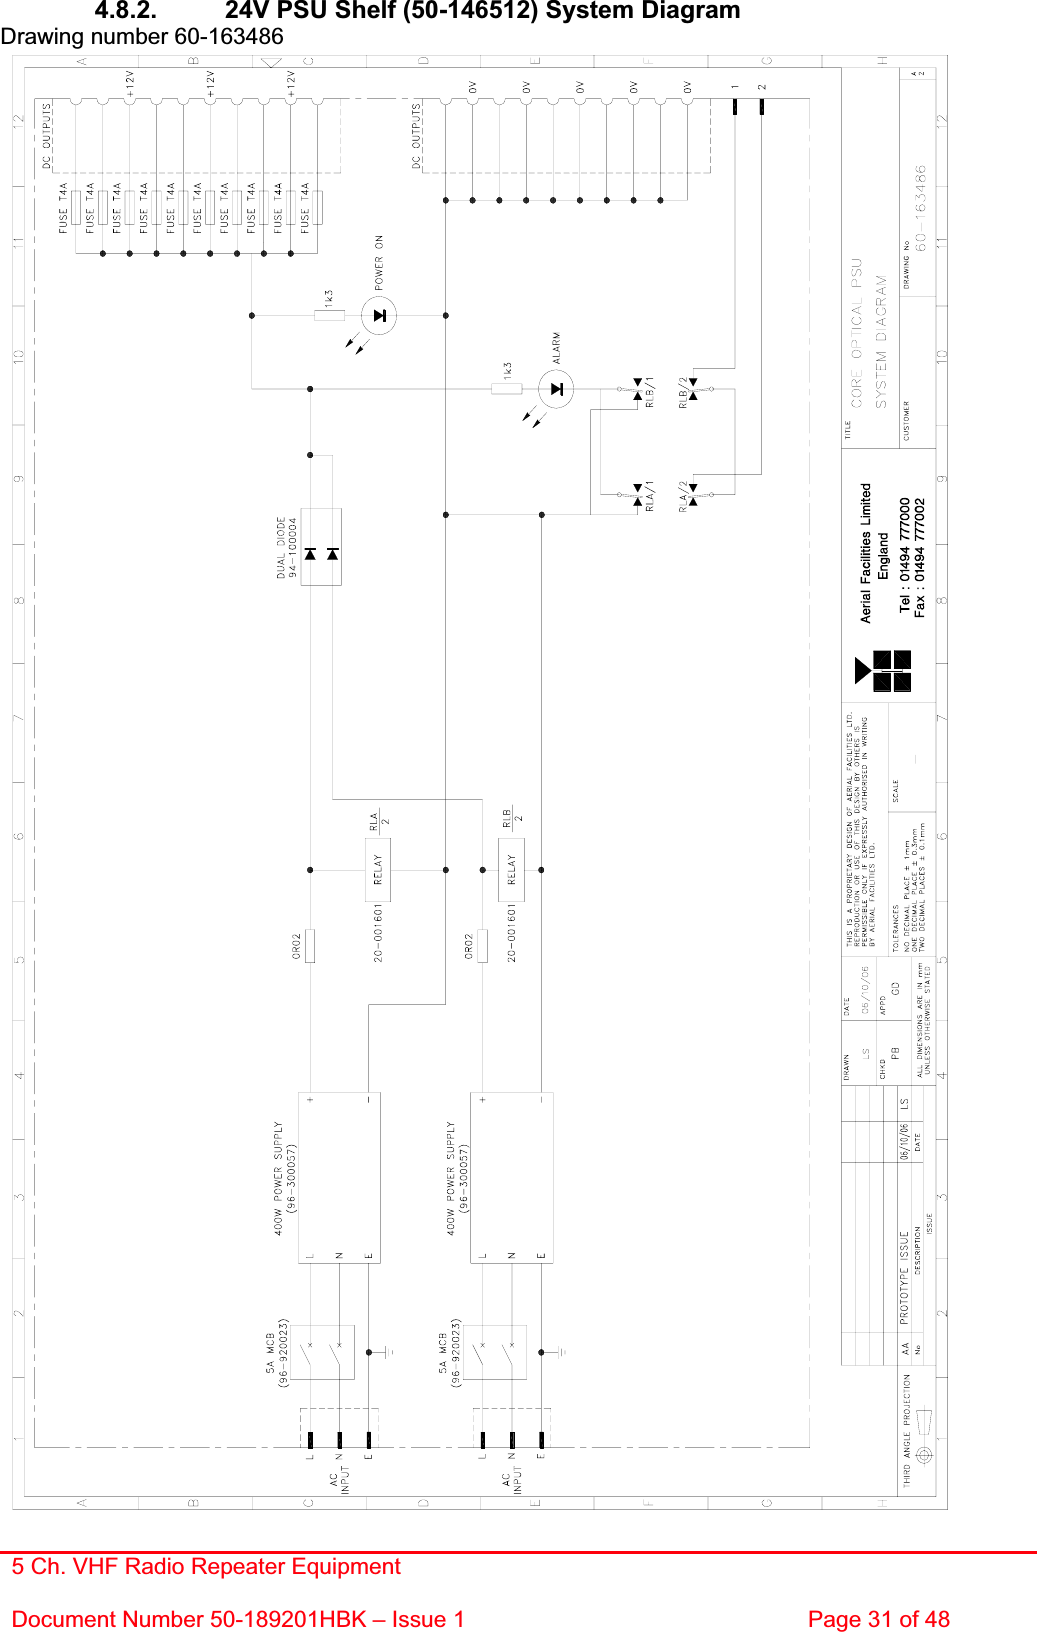 5 Ch. VHF Radio Repeater EquipmentDocument Number 50-189201HBK – Issue 1  Page 31 of 48 4.8.2.  24V PSU Shelf (50-146512) System Diagram Drawing number 60-163486 